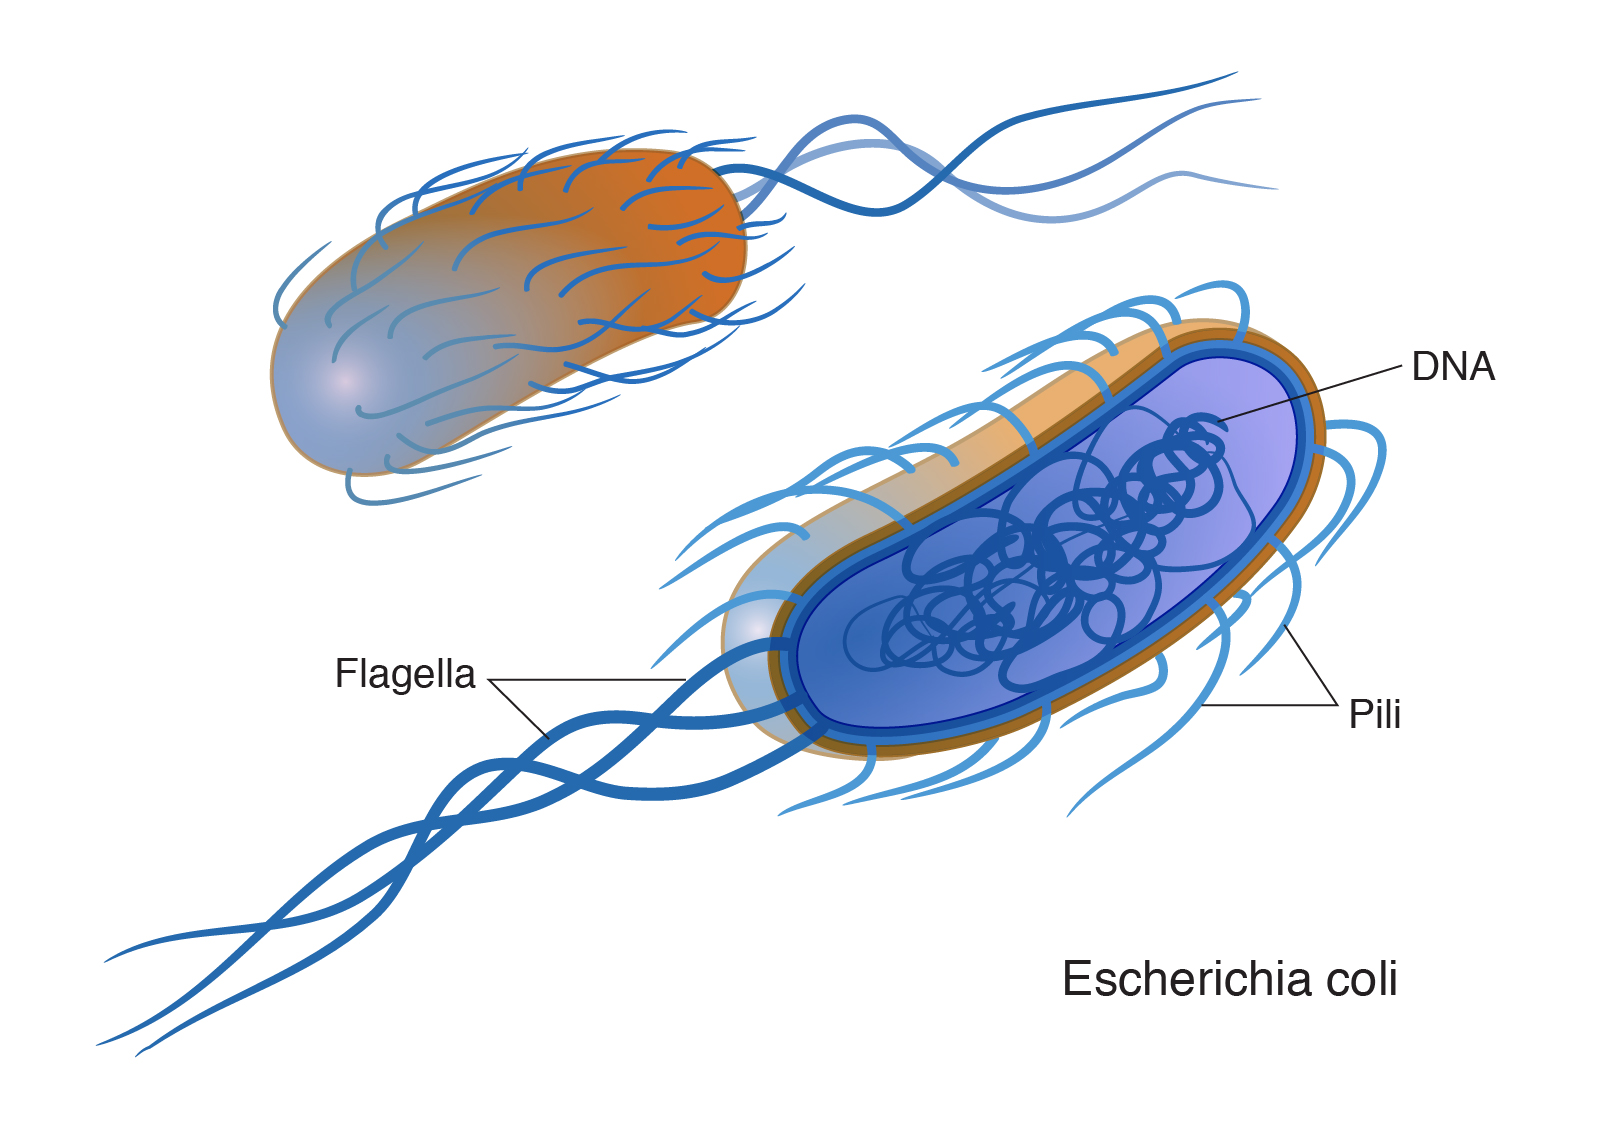 two types of bacteria shapes